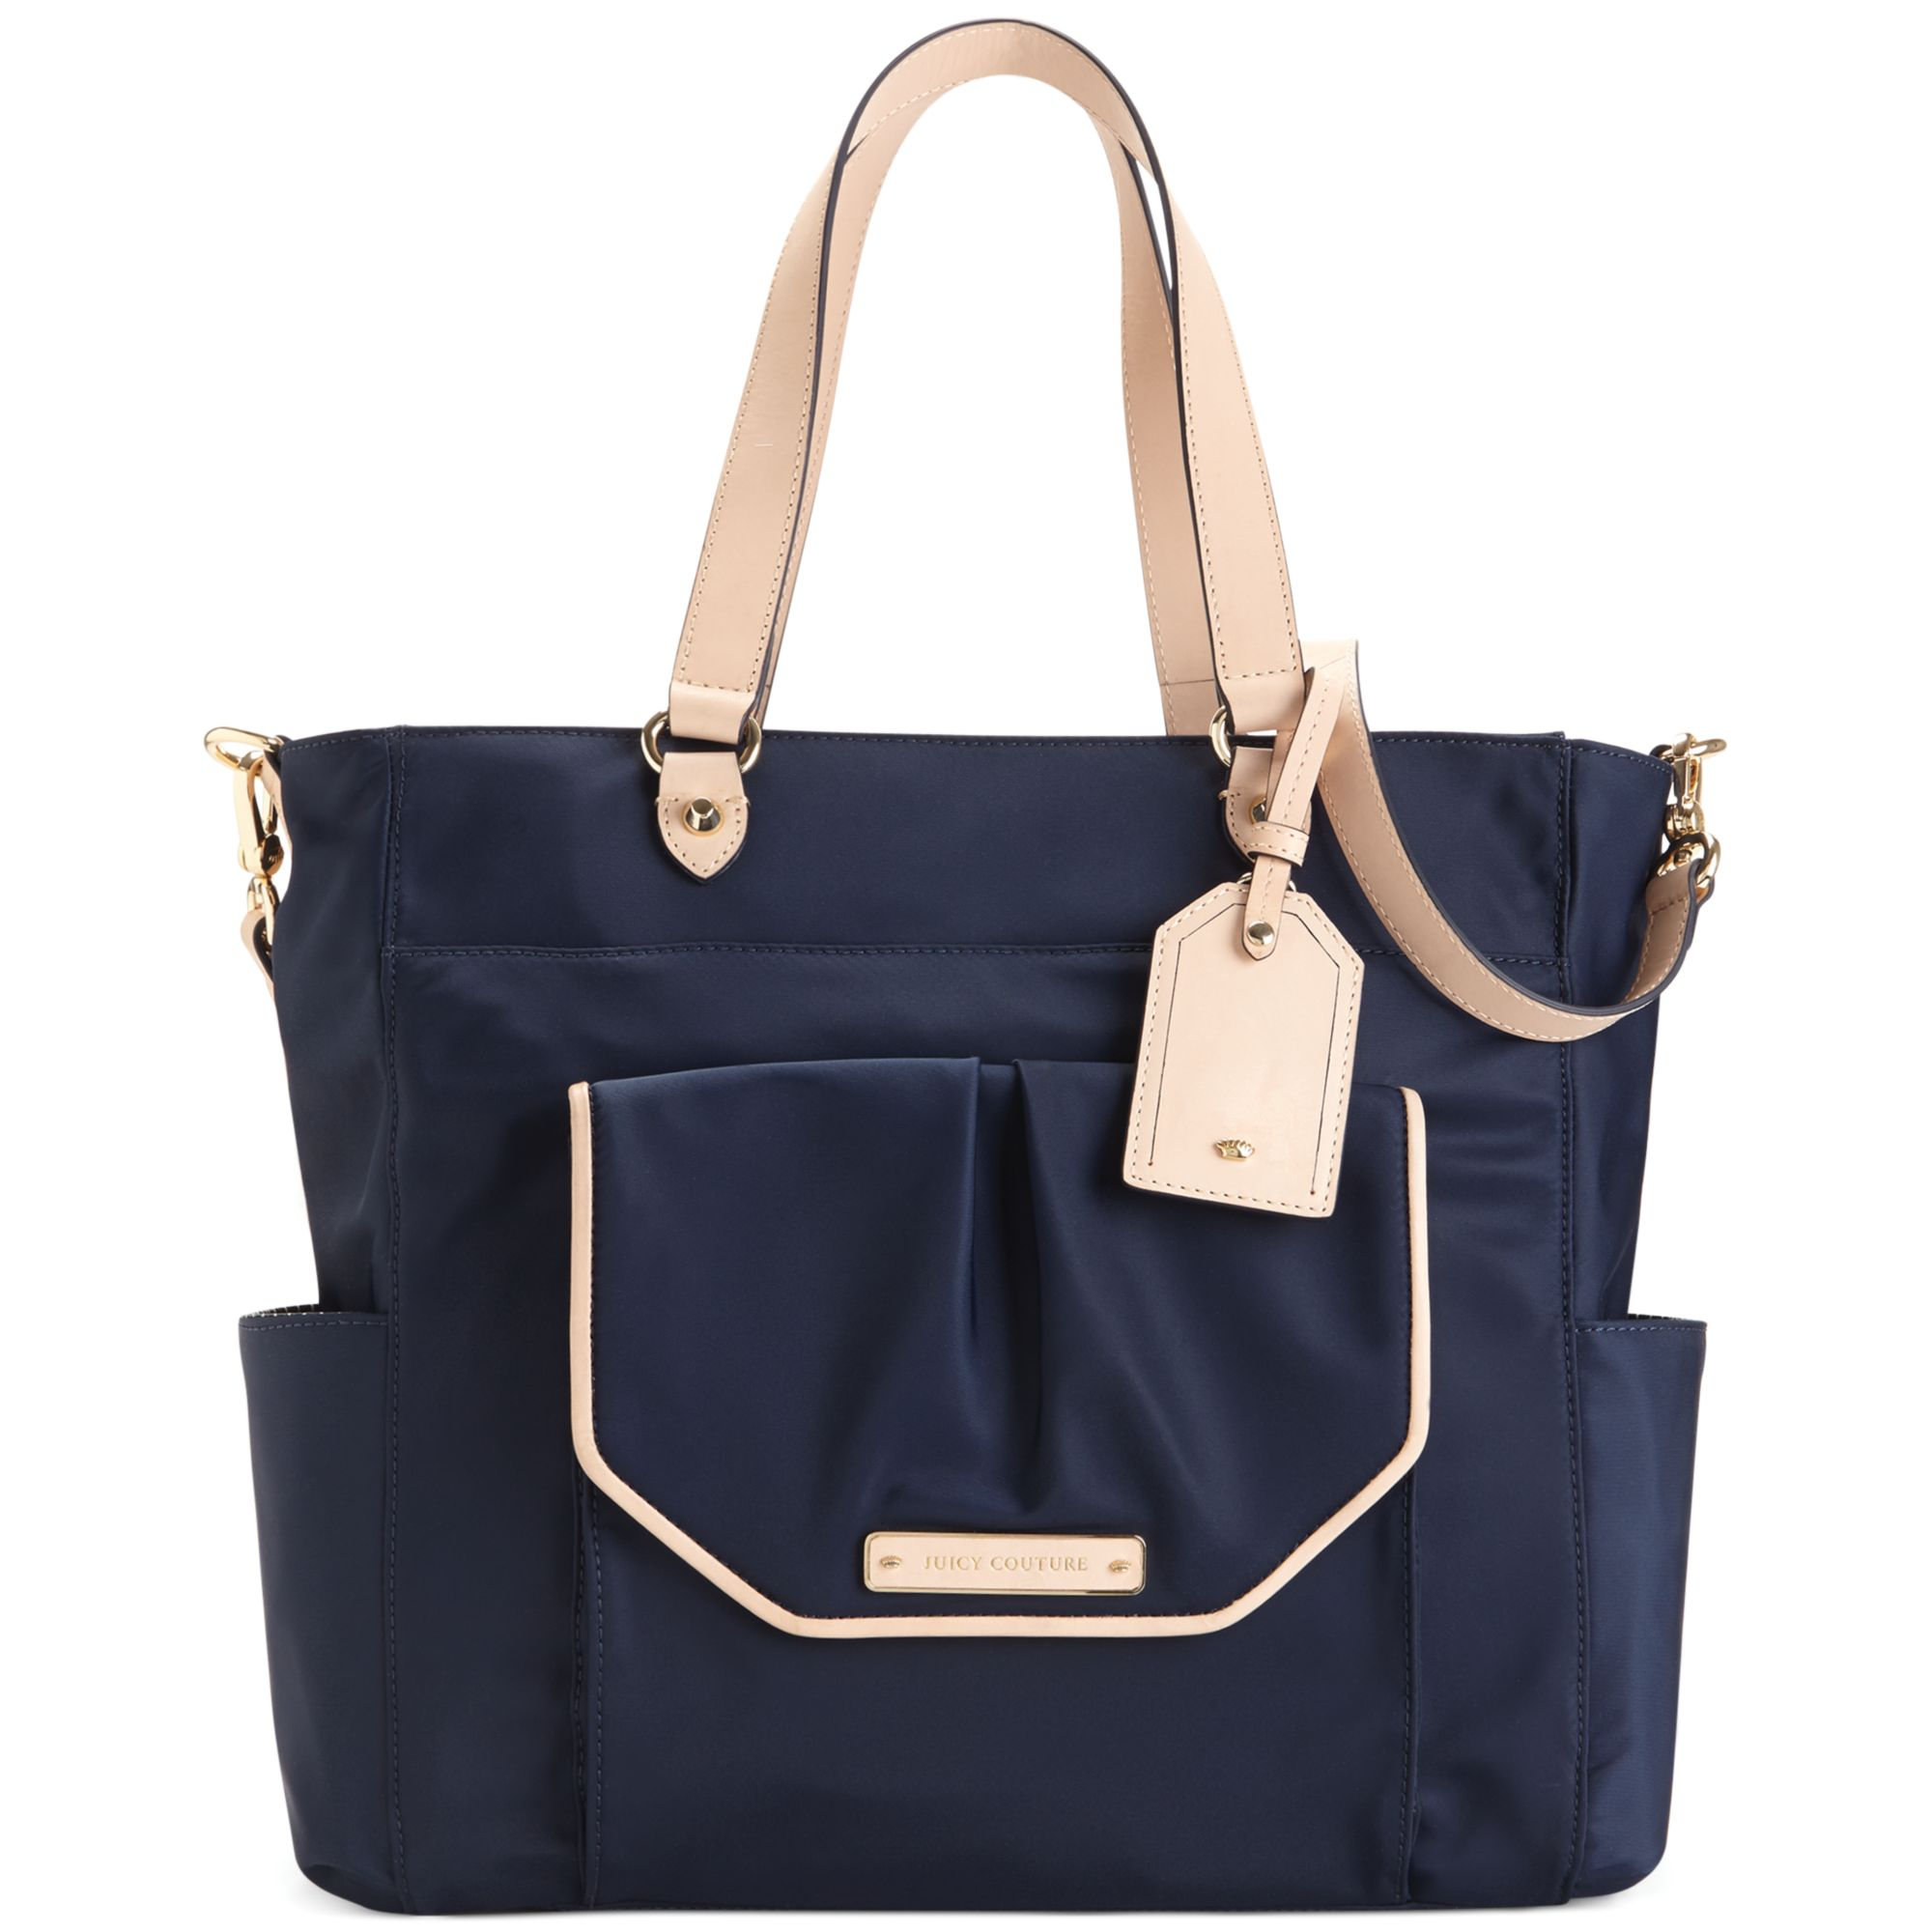 Juicy Couture Grove Hill Nylon Baby Bag in Blue (Regal) | Lyst